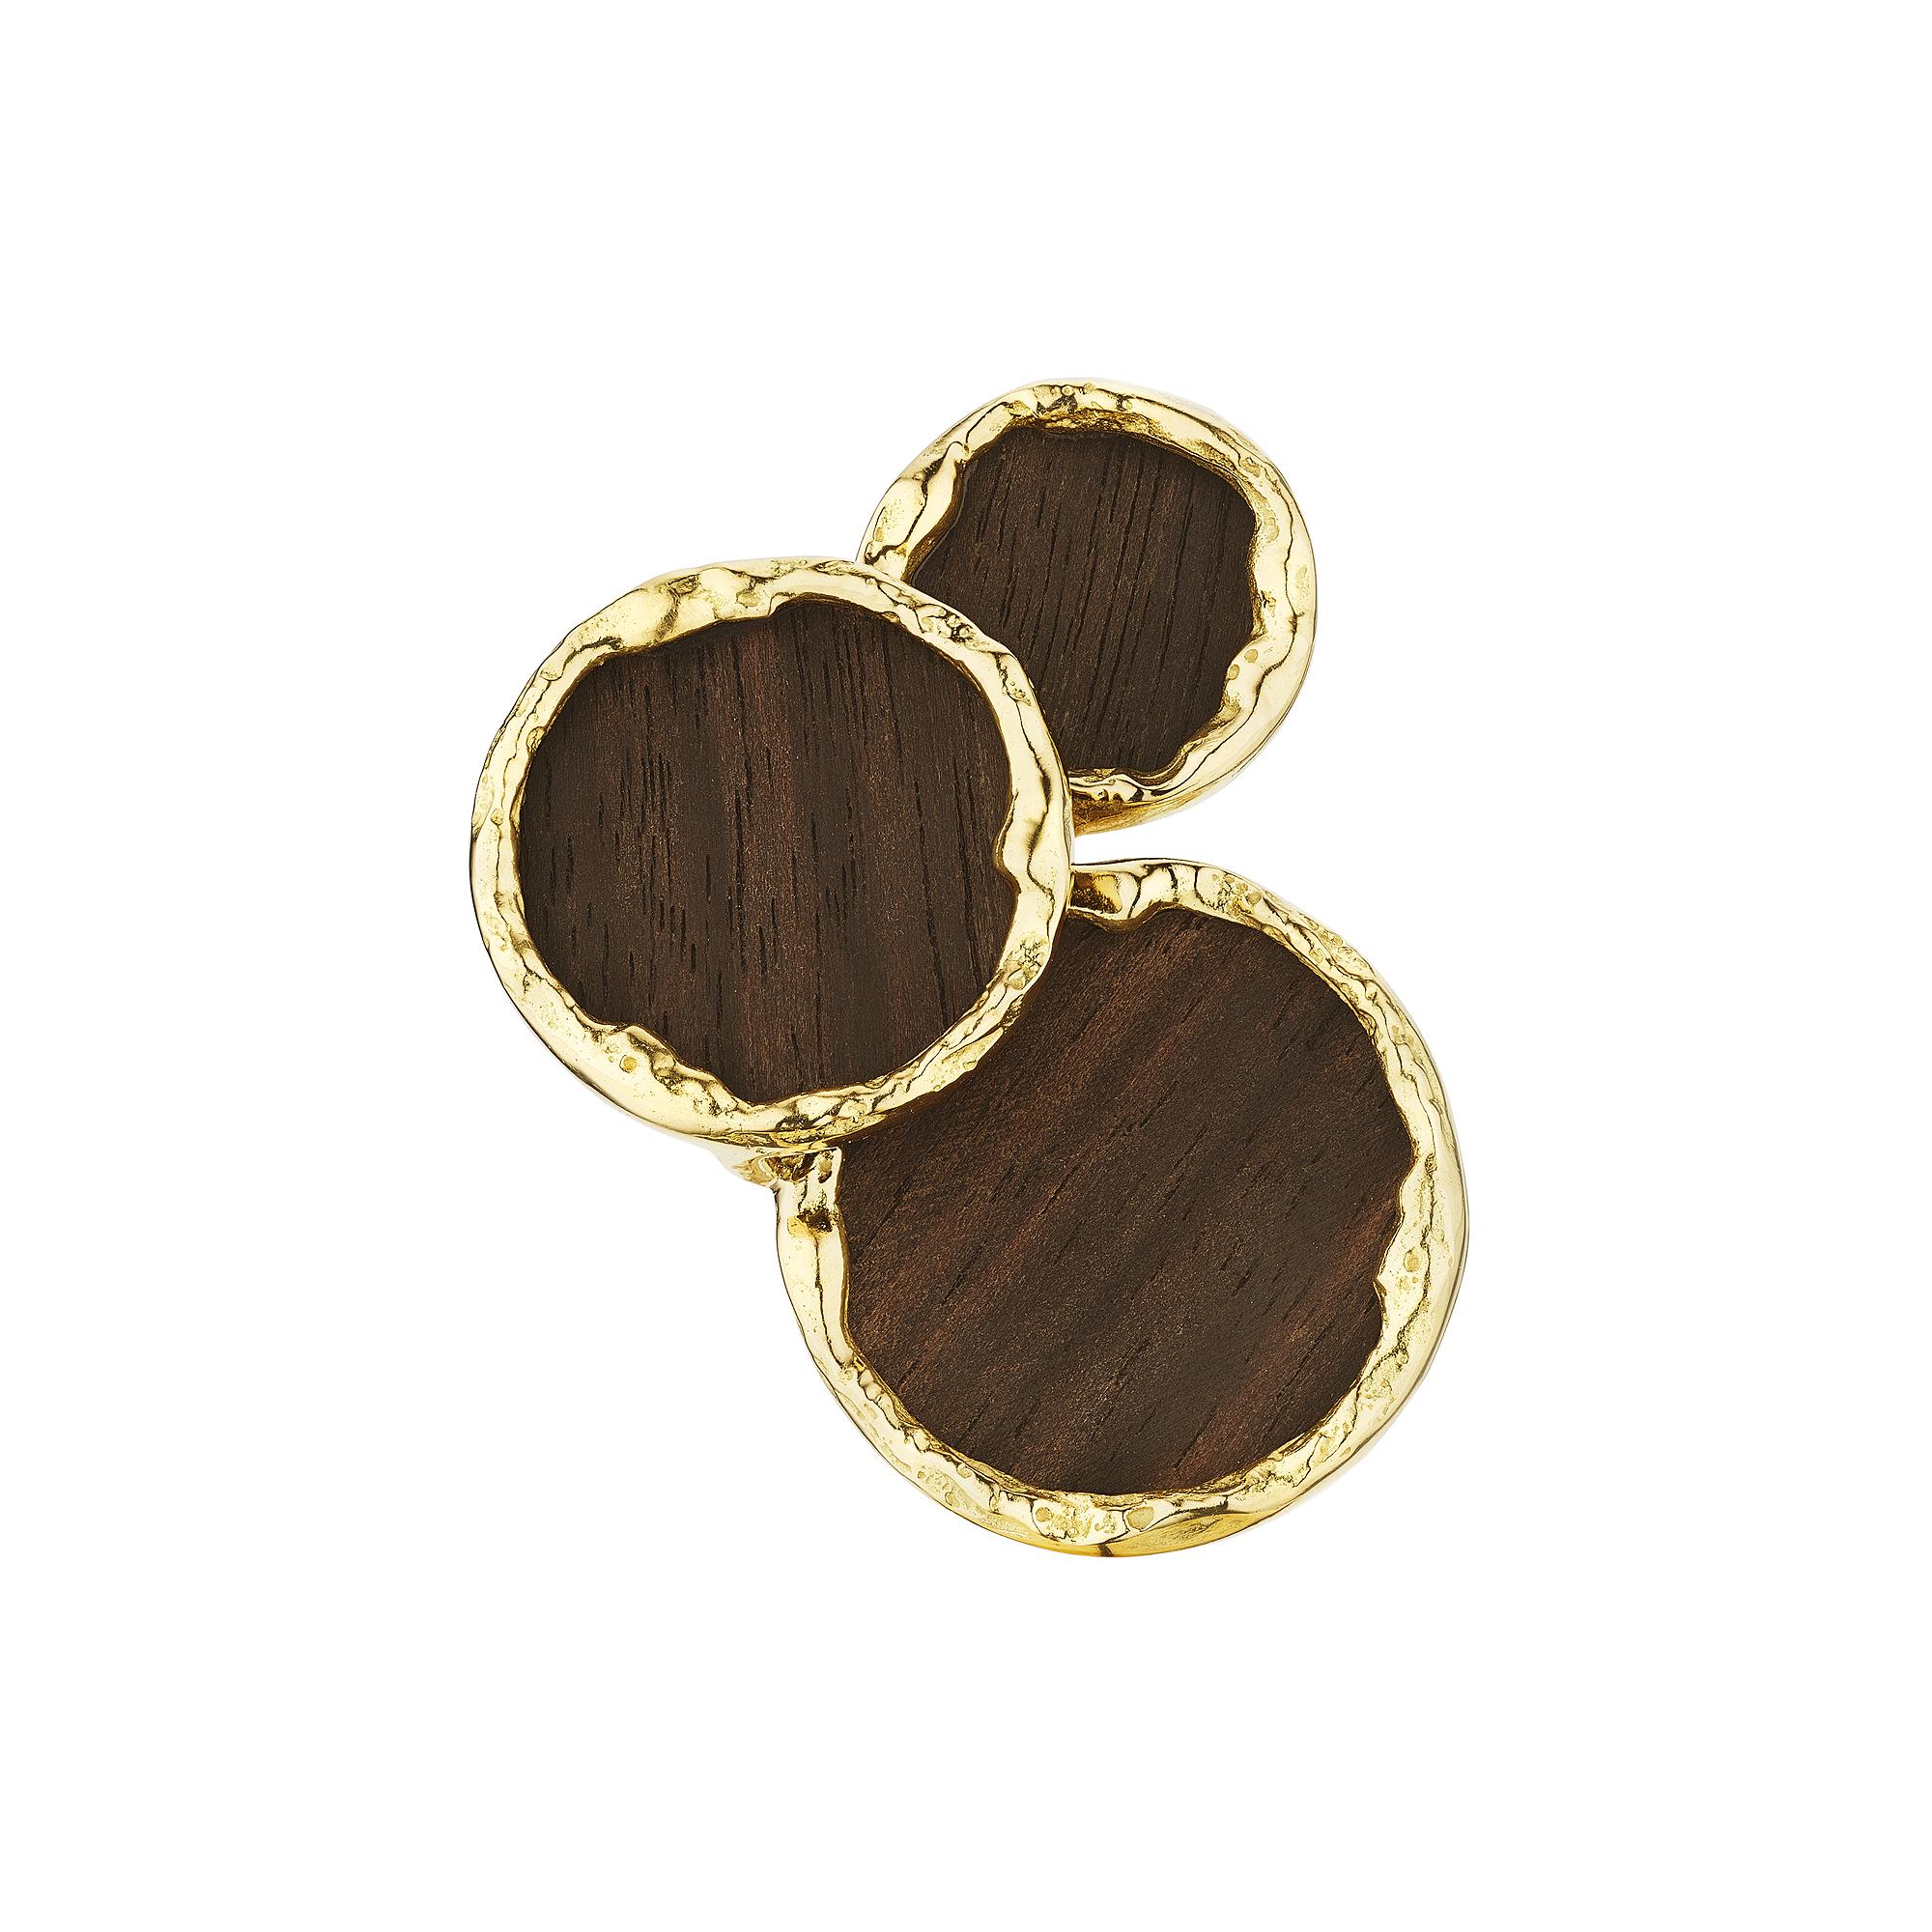 Ralph Waldo Emerson said that circles, like the soul, are never ending, and this Fred Paris mondernist rosewood and gold ring will become your timeless treasure.  With three overlapping rosewood circles rimmed in a free-form gold frame, this highly